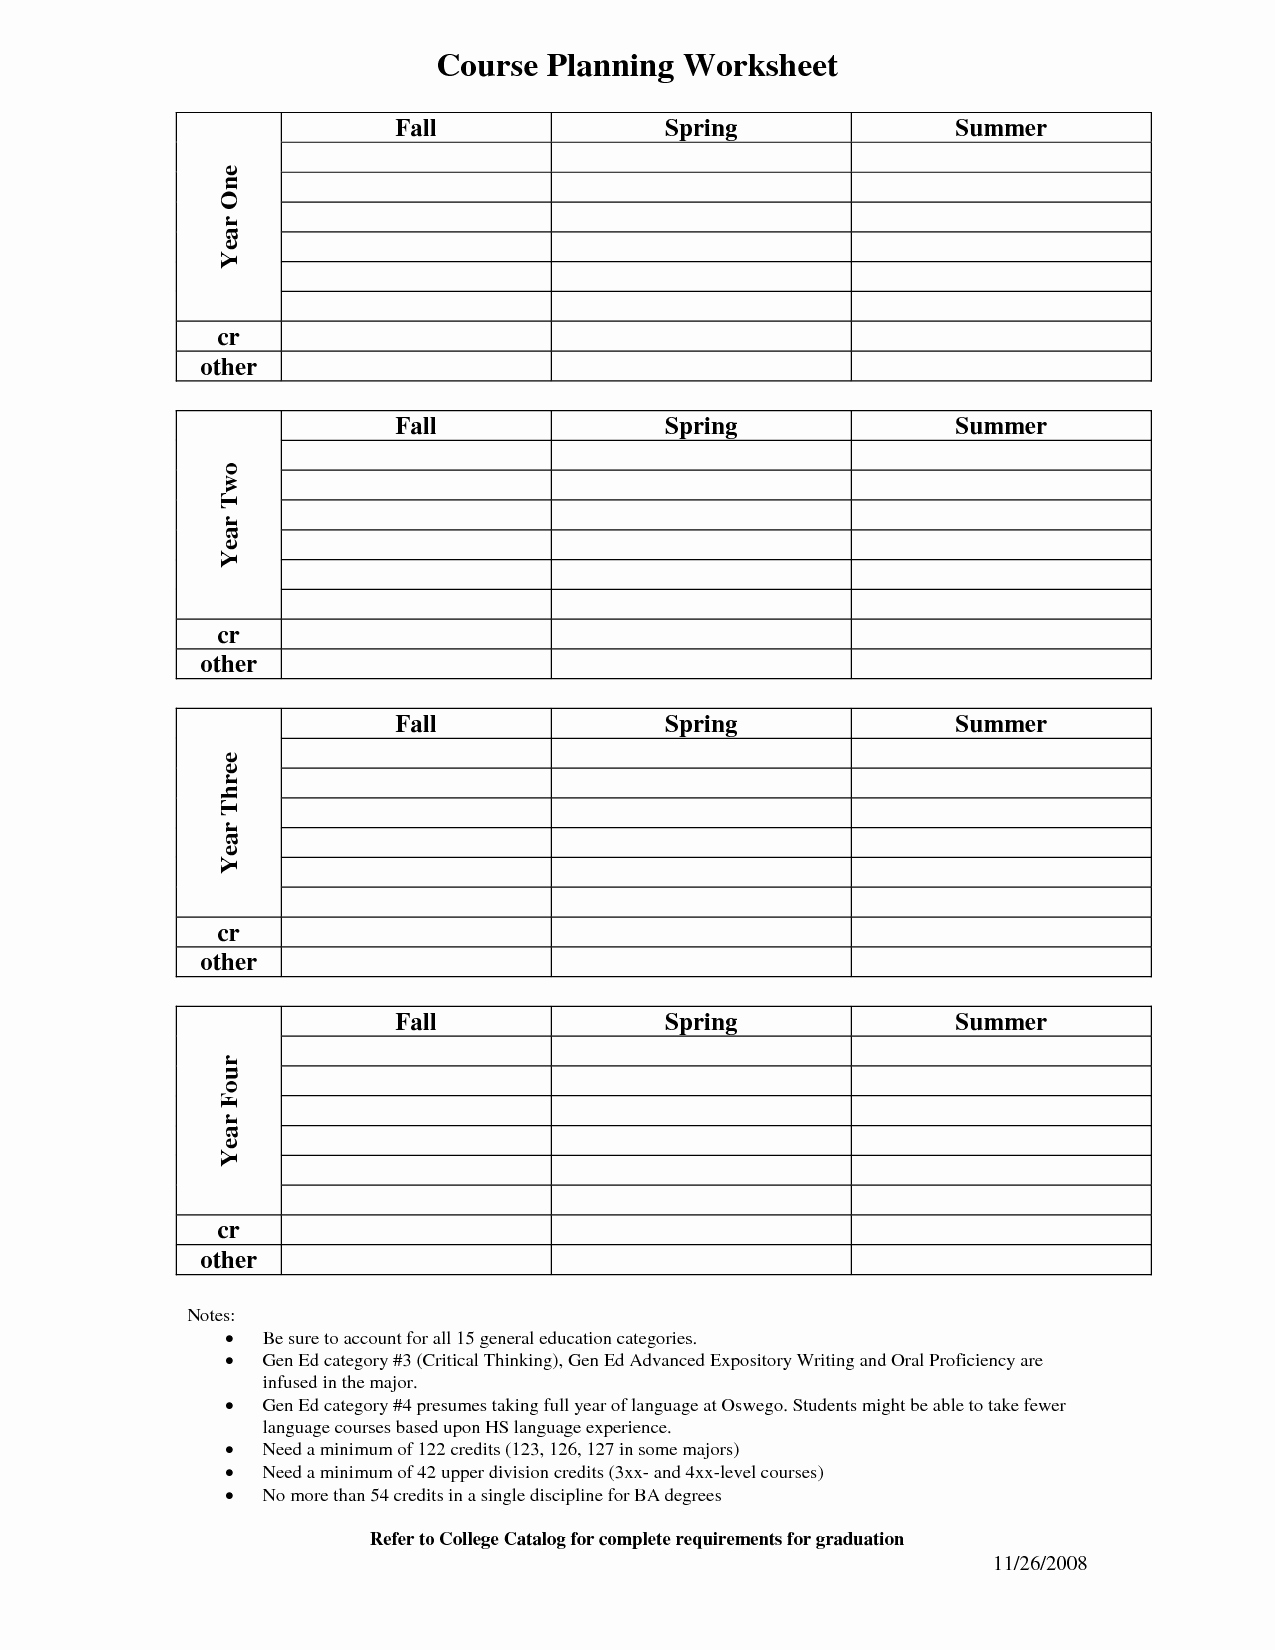 College Four Year Plan Template Best Of 11 Best Of Four Year Course Planning Worksheet